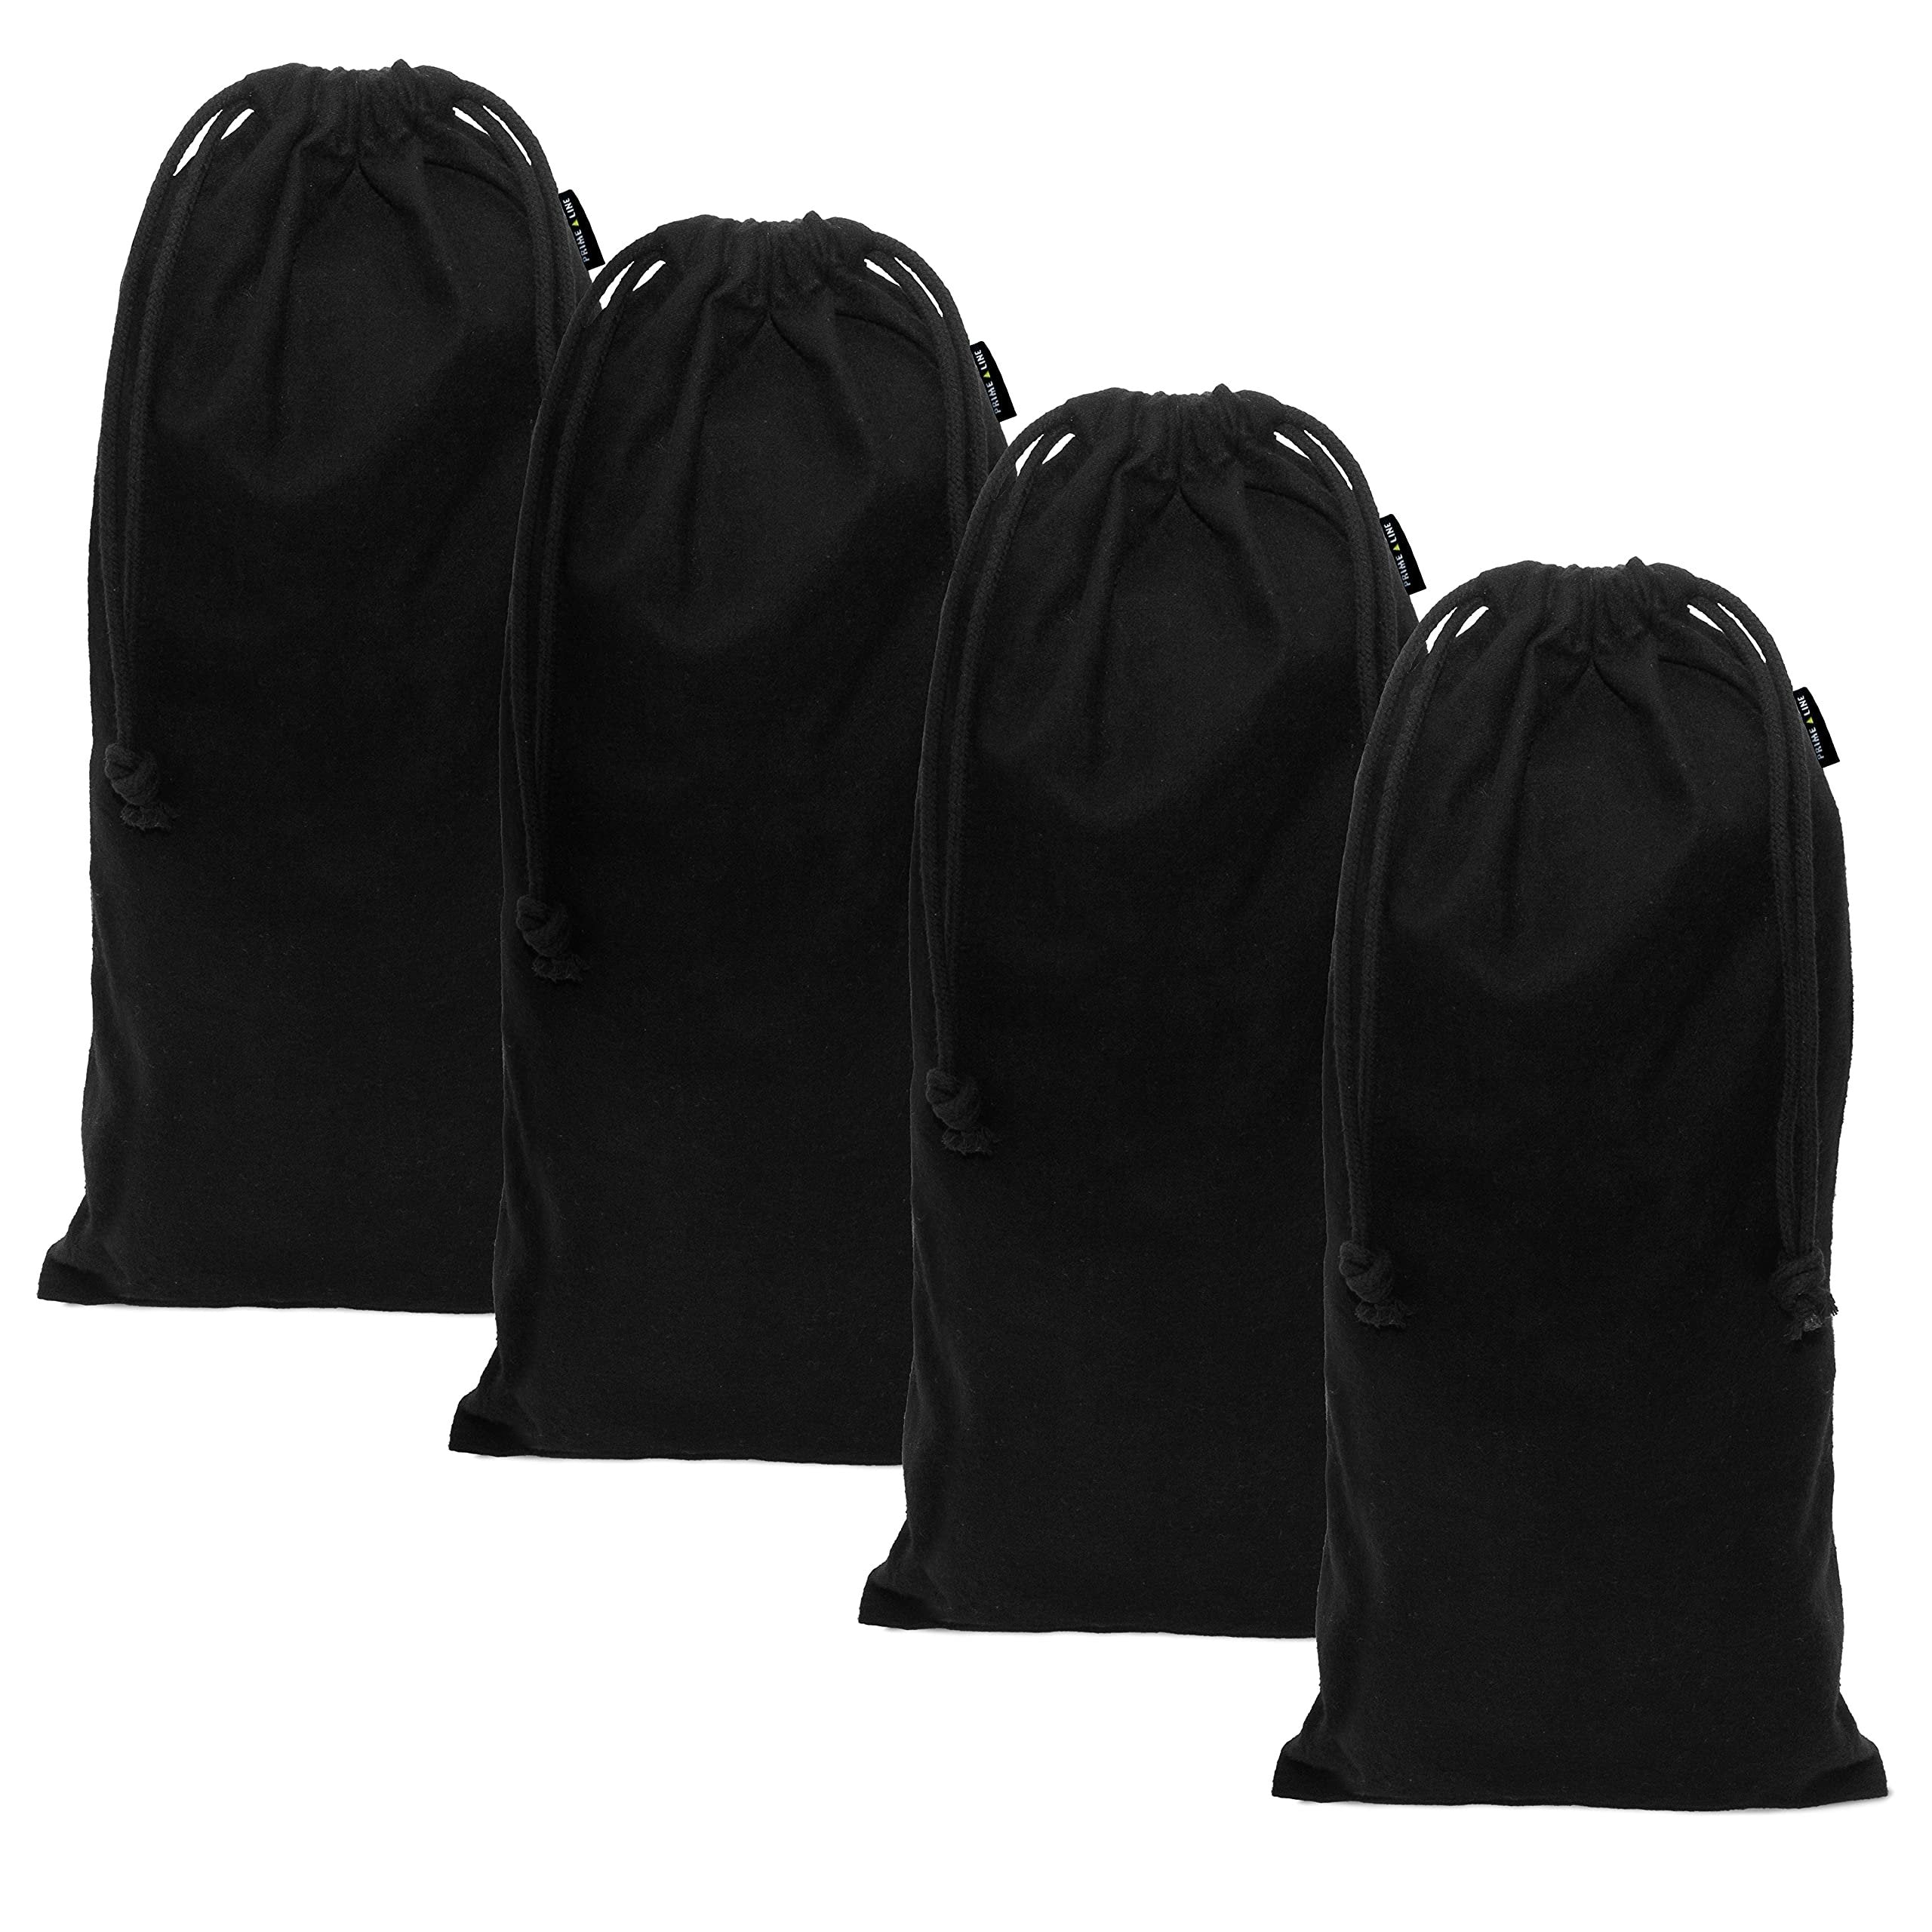 ZENPAC Shoe Dust Bags - 8x17 Inch Black, Pack of 4 - Drawstring Closure, Washable Cotton Fabric for Travel & Storage